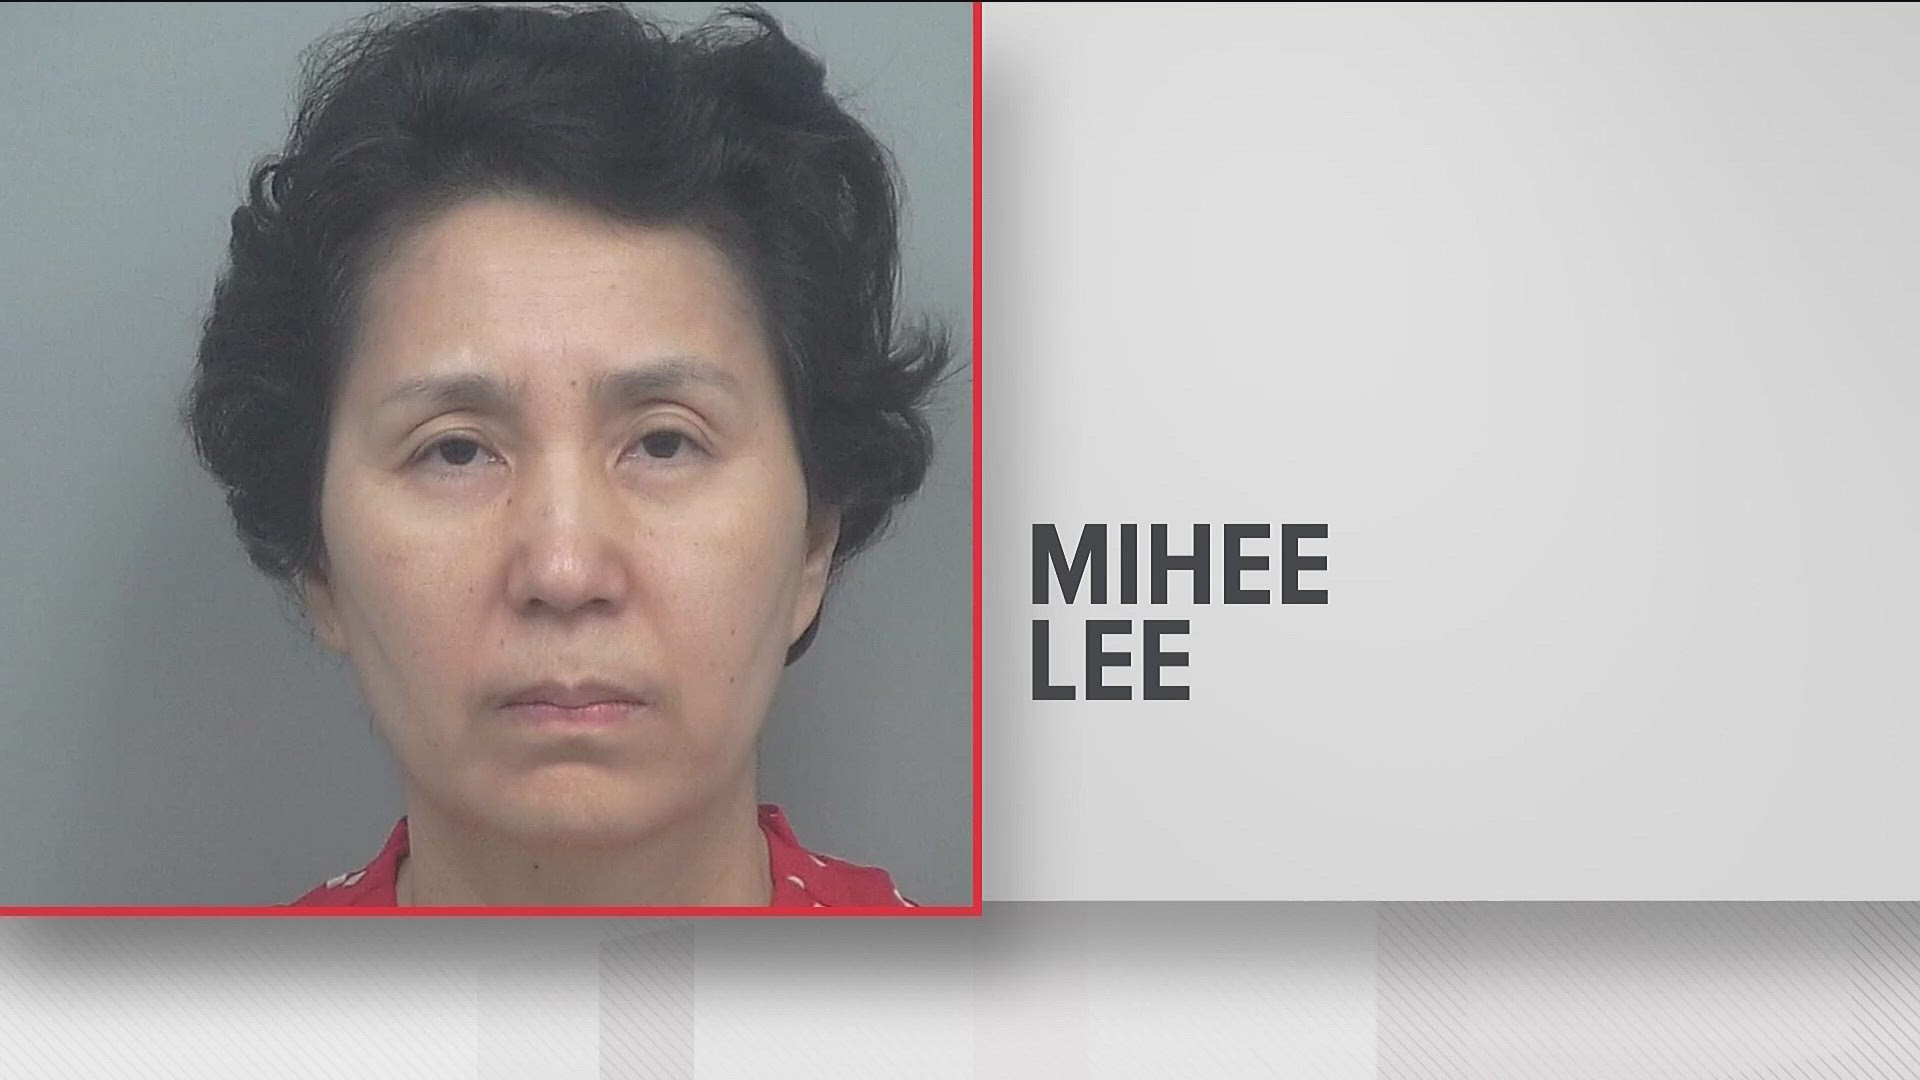 Mihee Lee is just one of six suspects that were accused of playing a role in the woman's death.